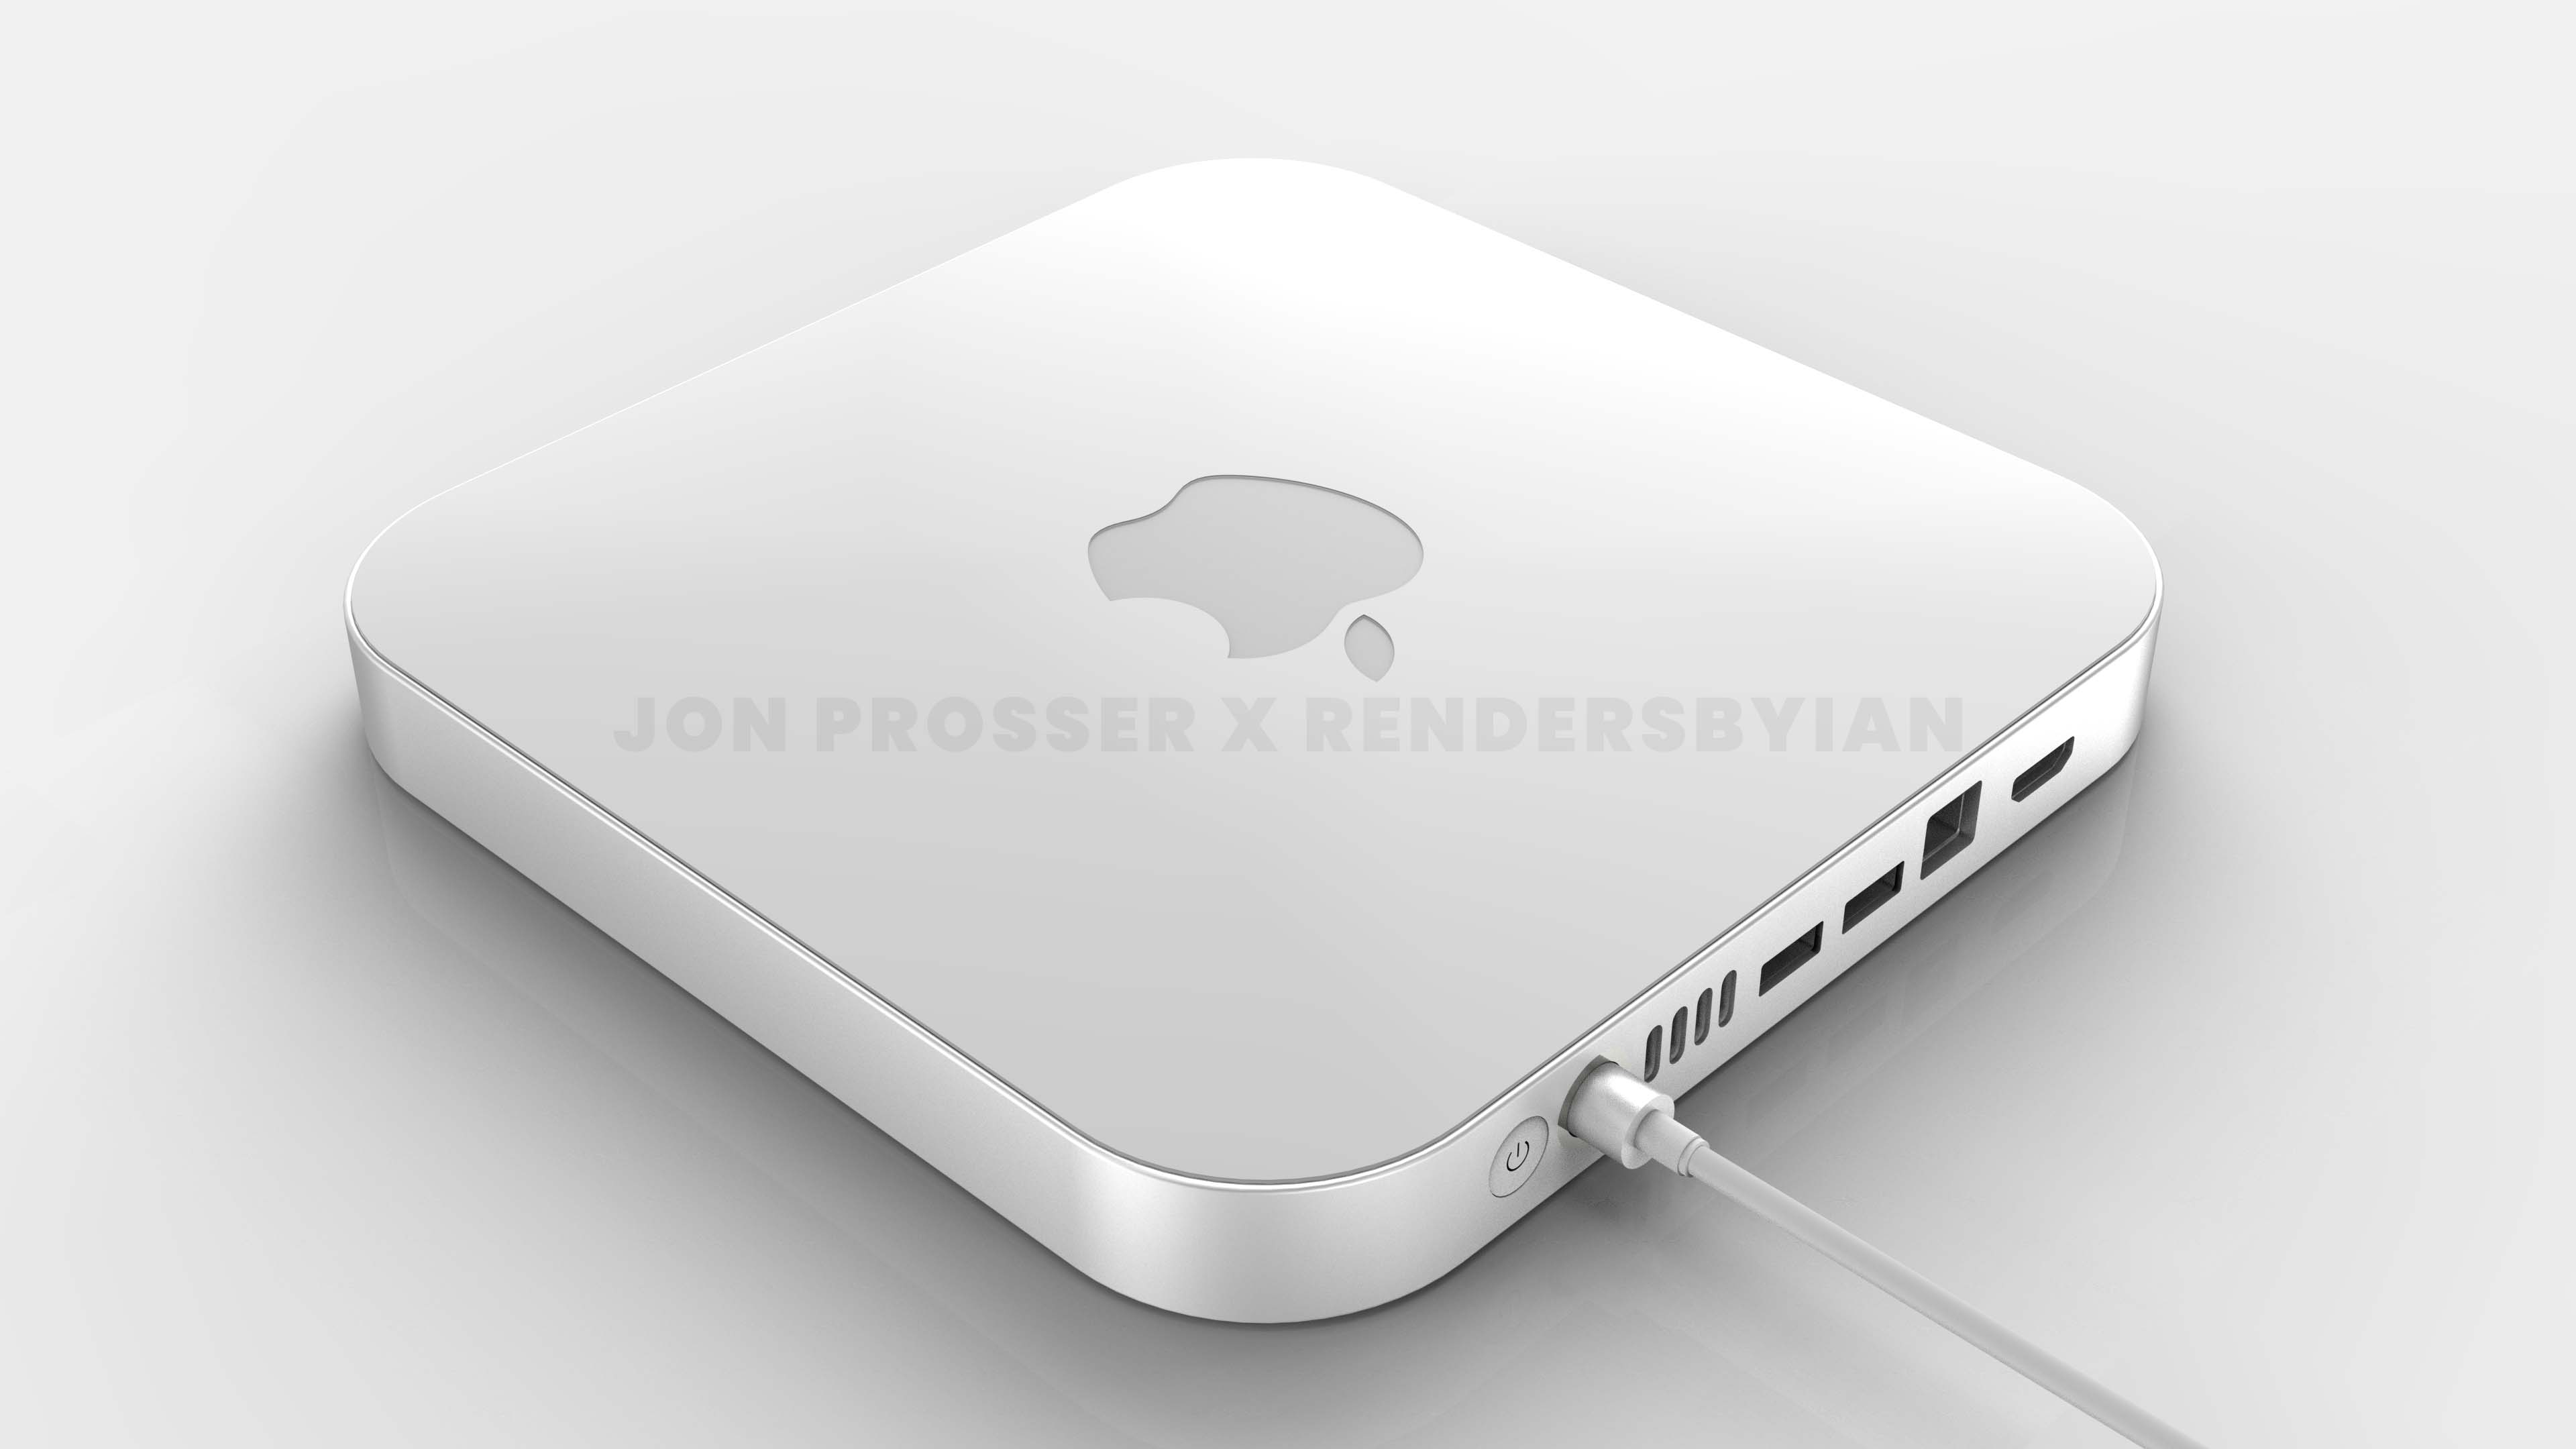 M2 Mac mini: Here's everything we know